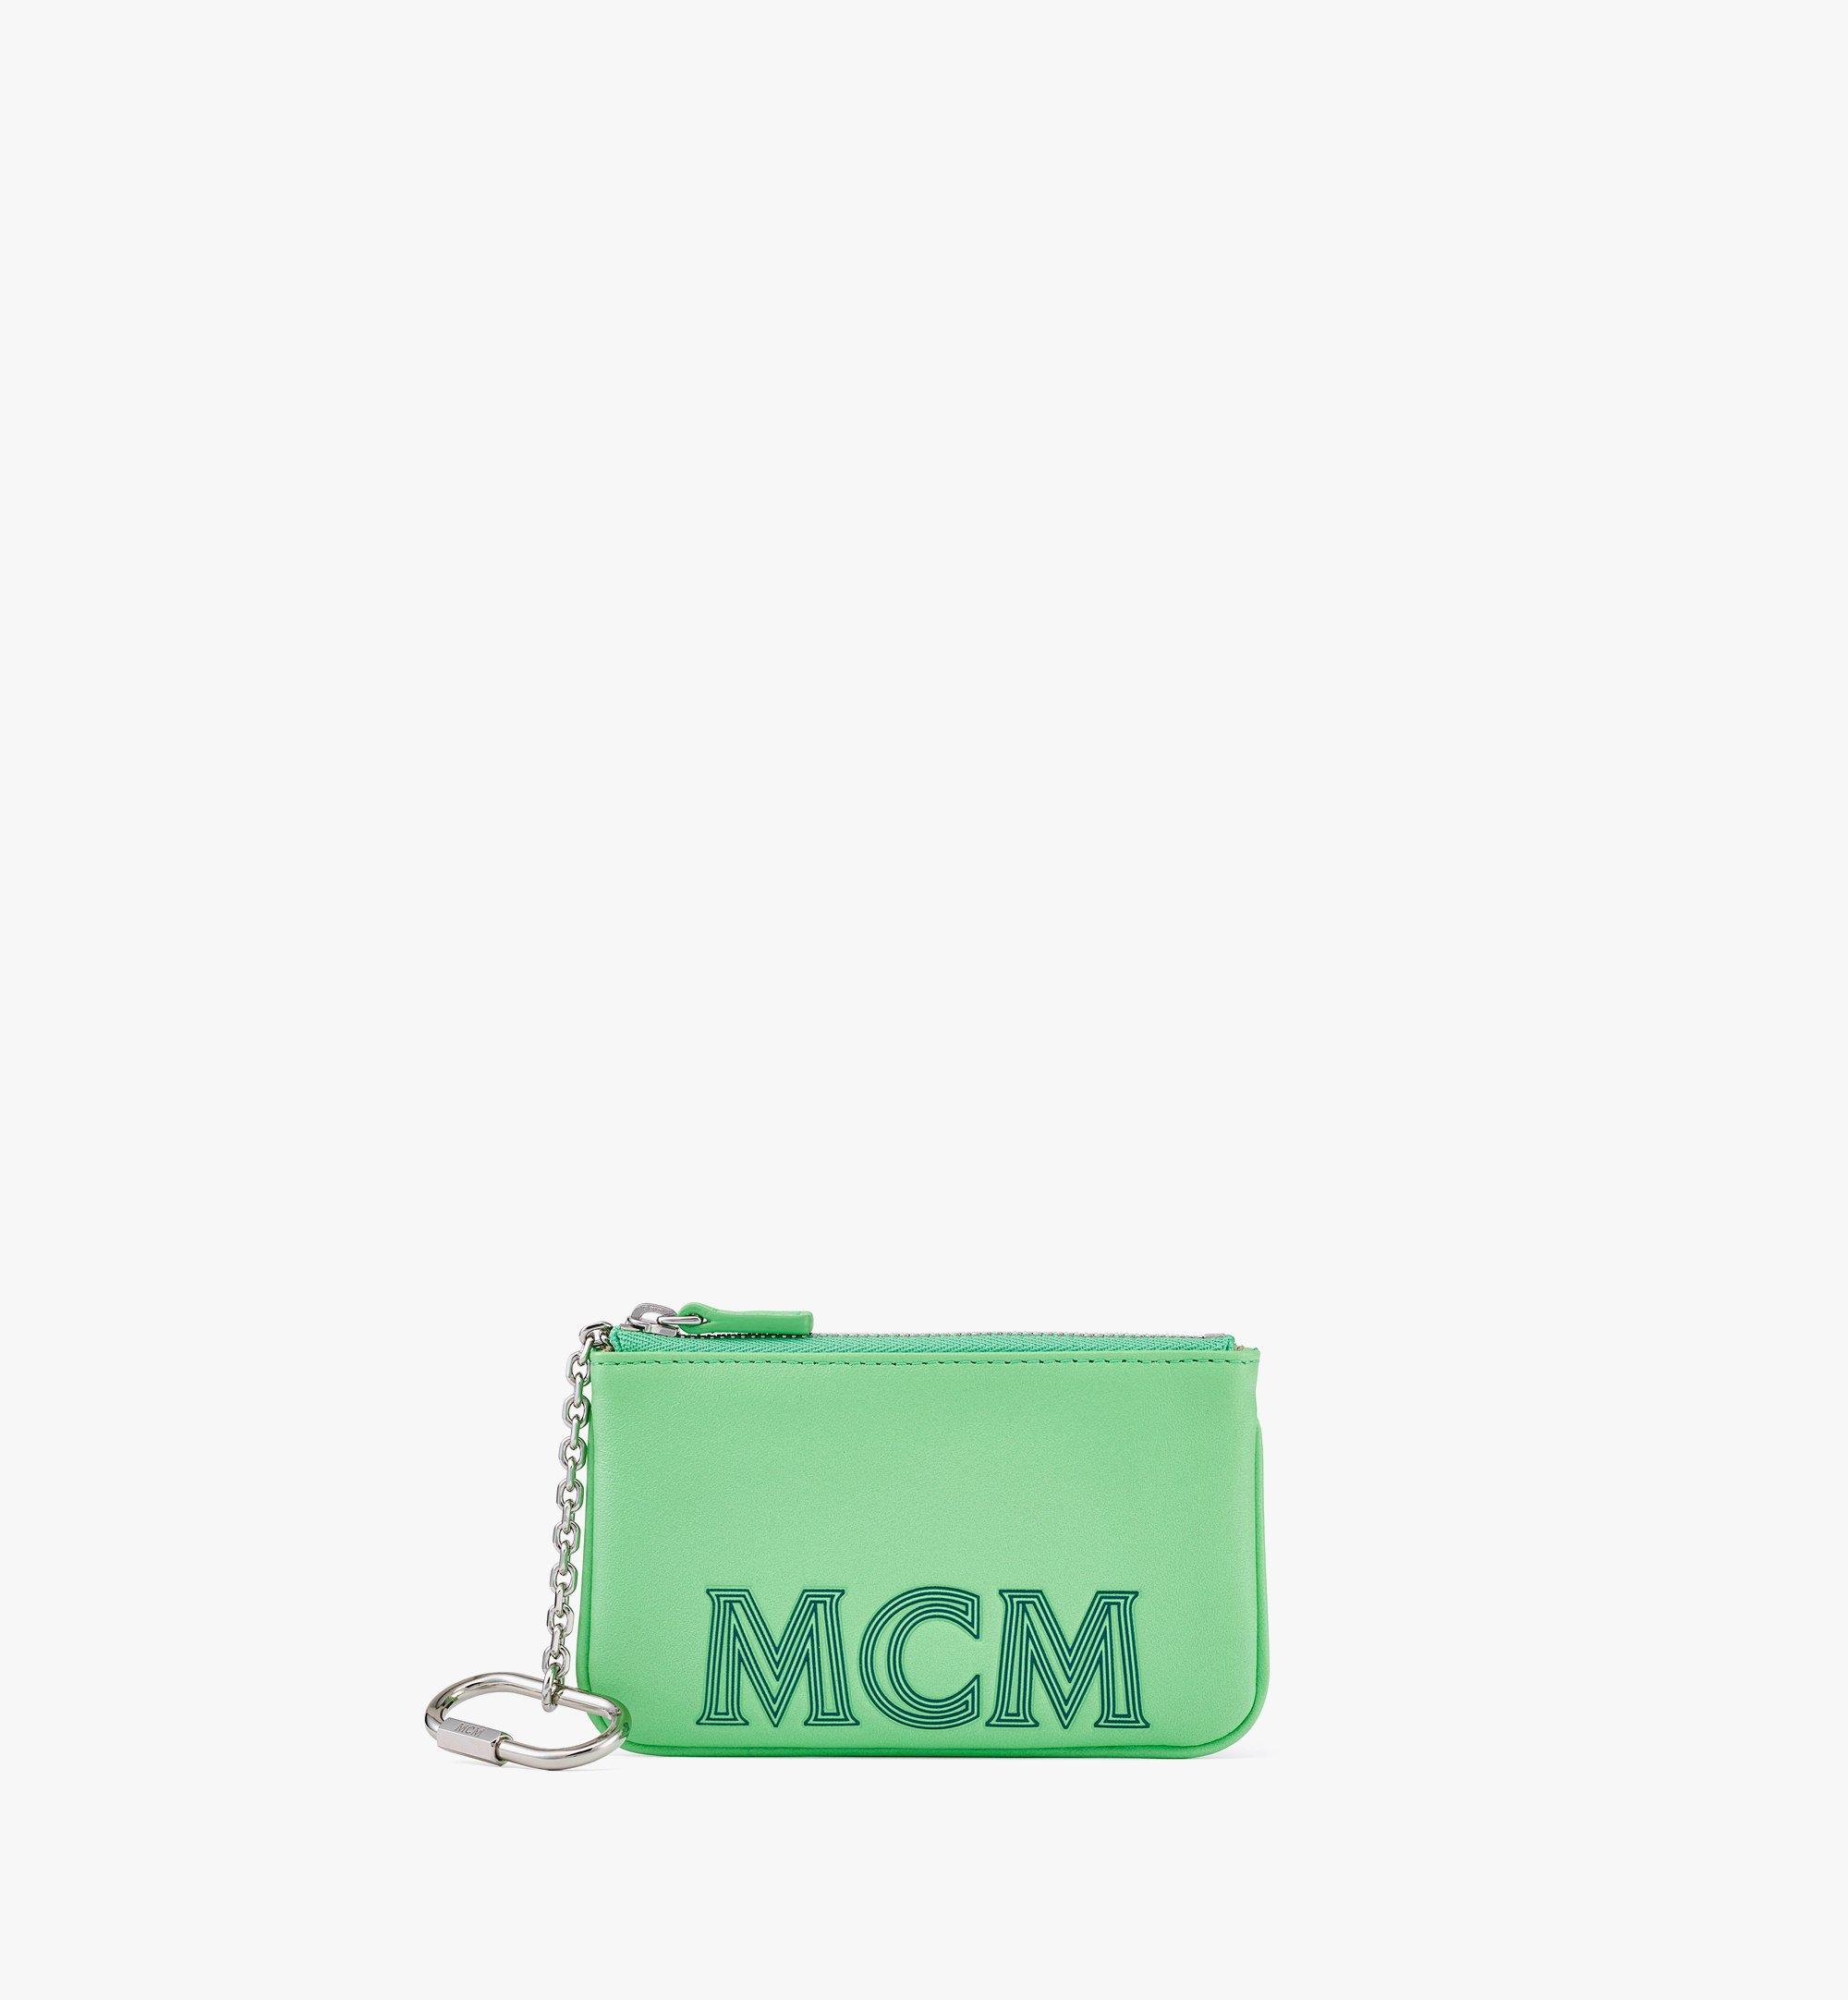 MCM Key Pouch in MCM Leather Green MXKCSSX02JW001 Alternate View 1